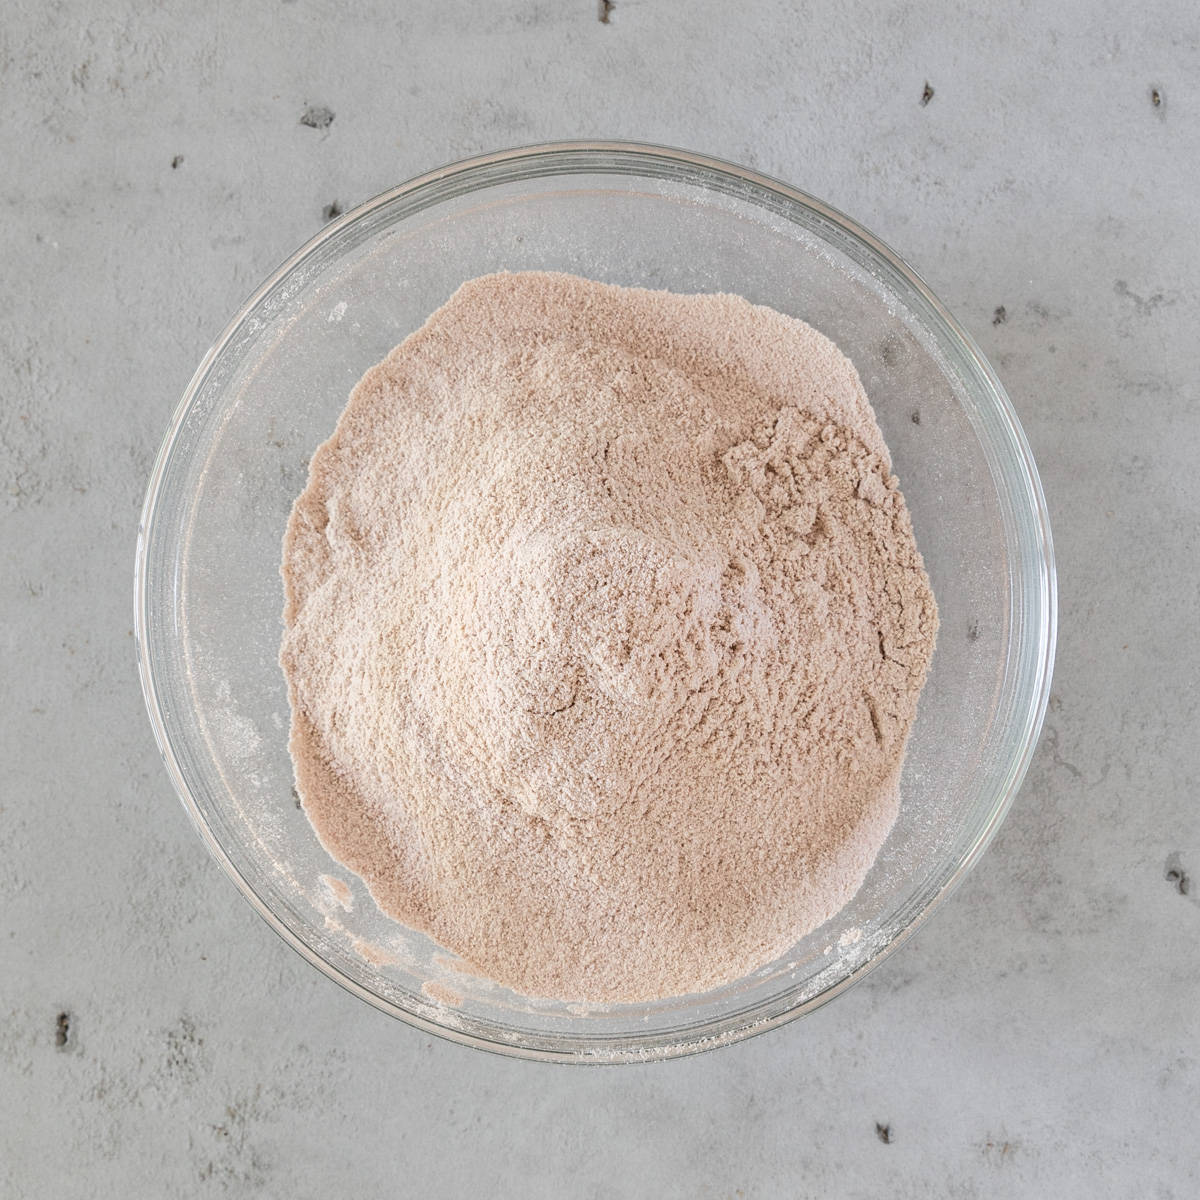 the dry ingredients sifted together in a glass bowl on a grey background.